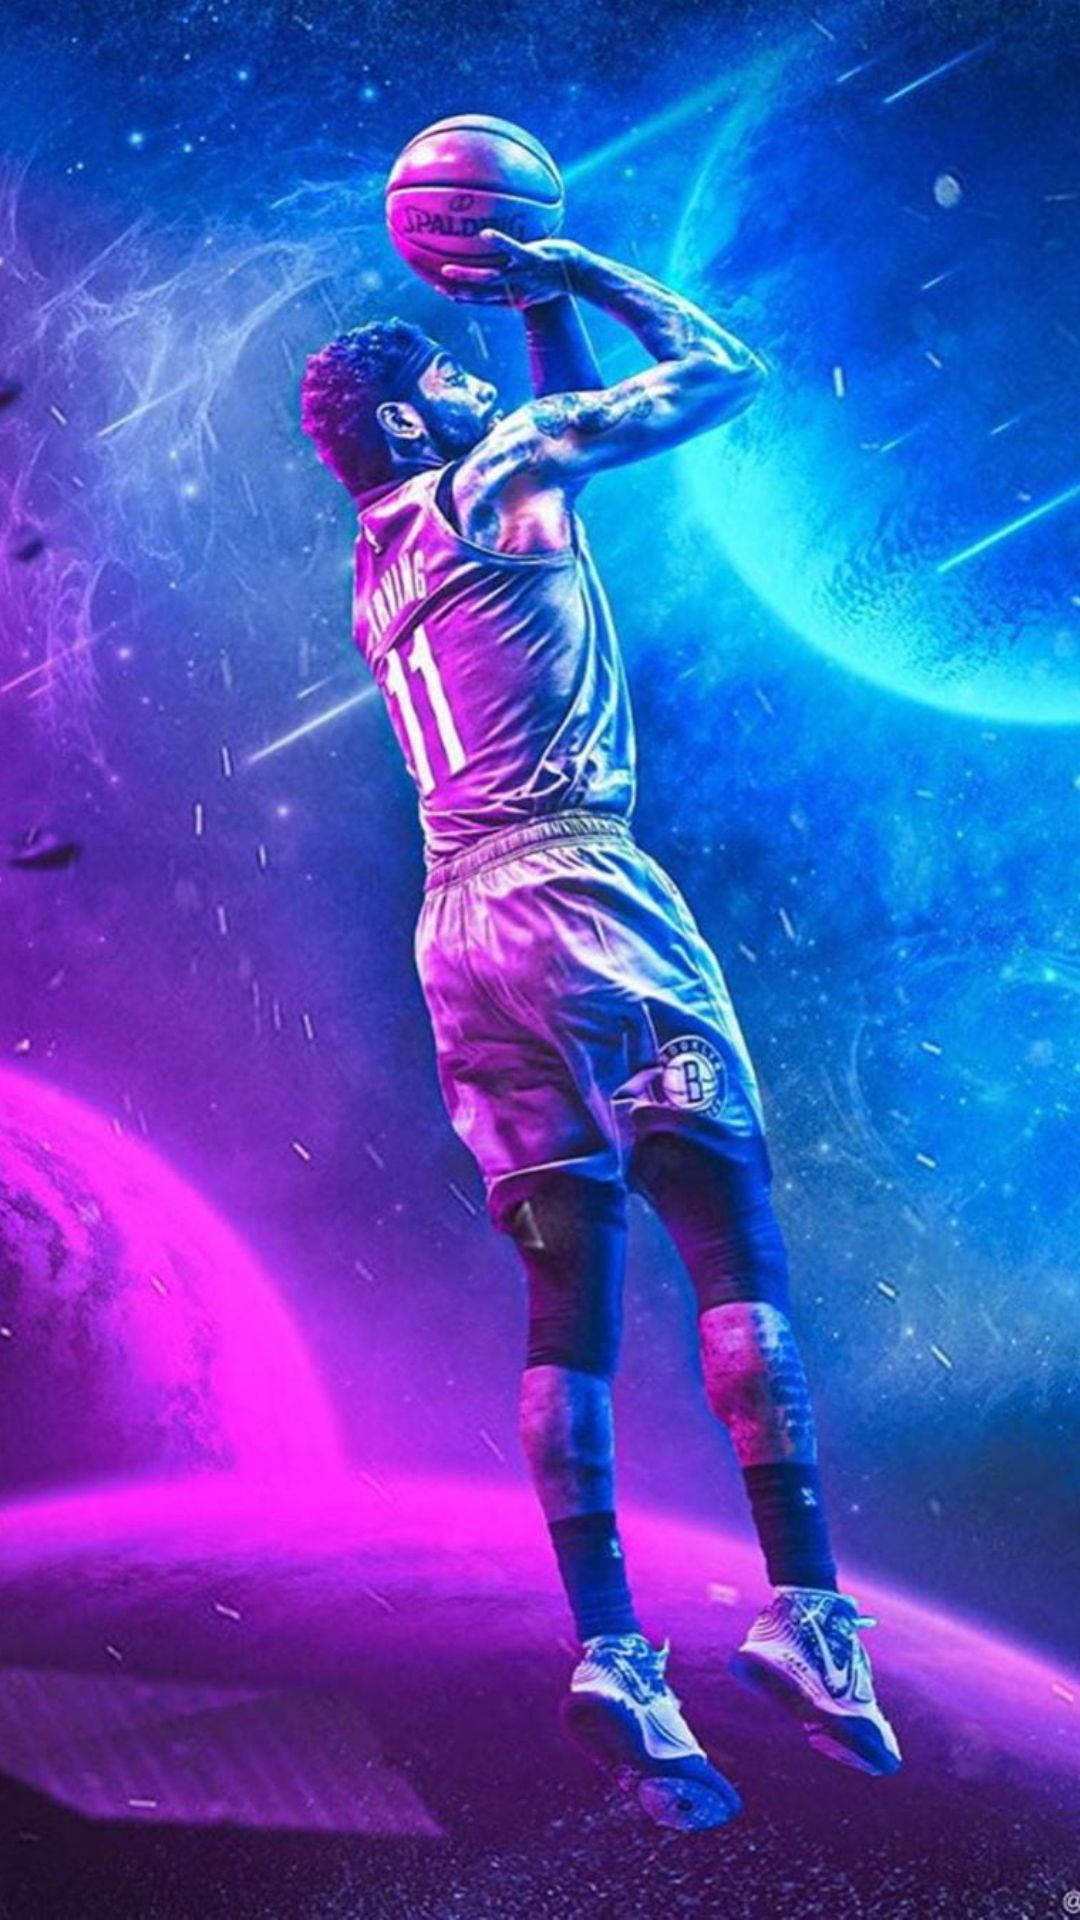 Download Basketball iPhone Retro Wave Irving Wallpaper